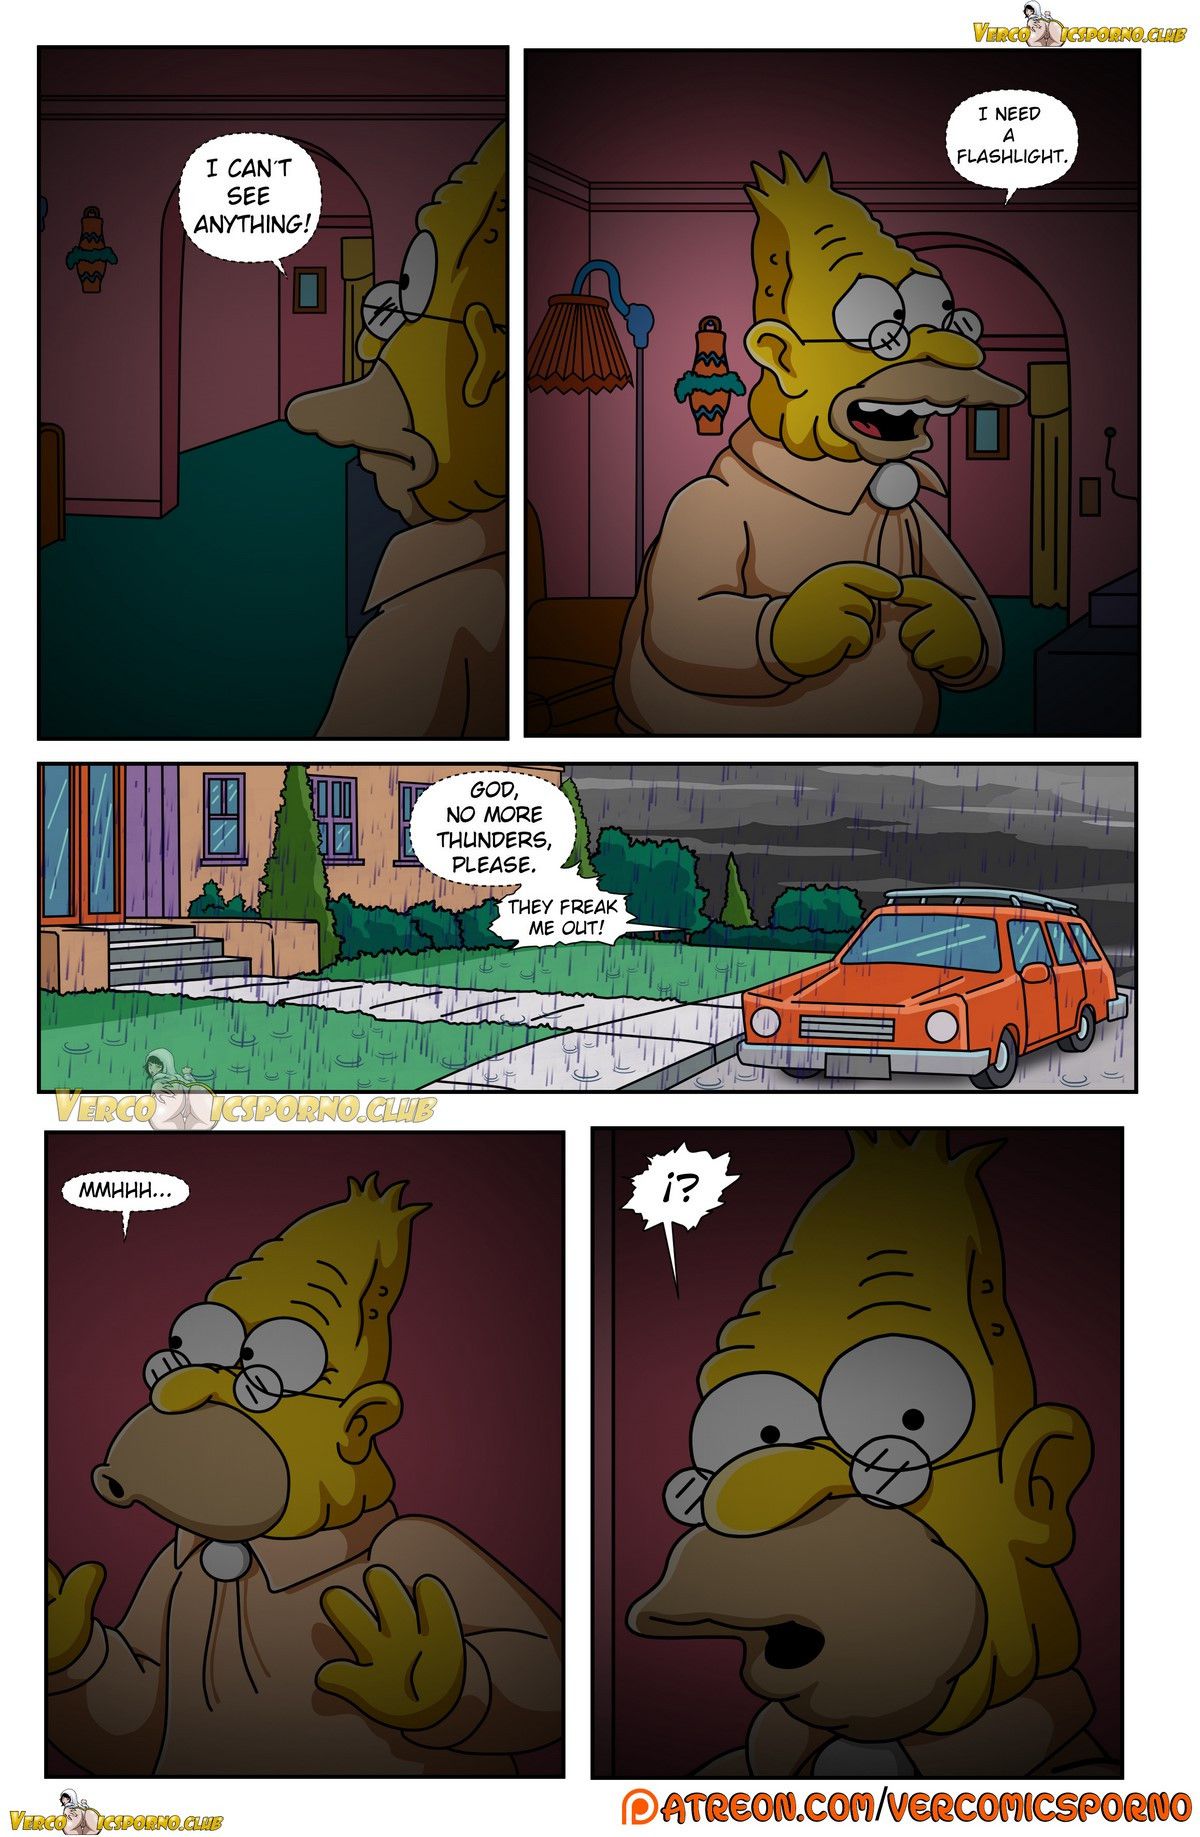 Grandpa and me - [Itooneaxxx] - [Drah Navlag] - [VCP] - [The Simpsons] 12